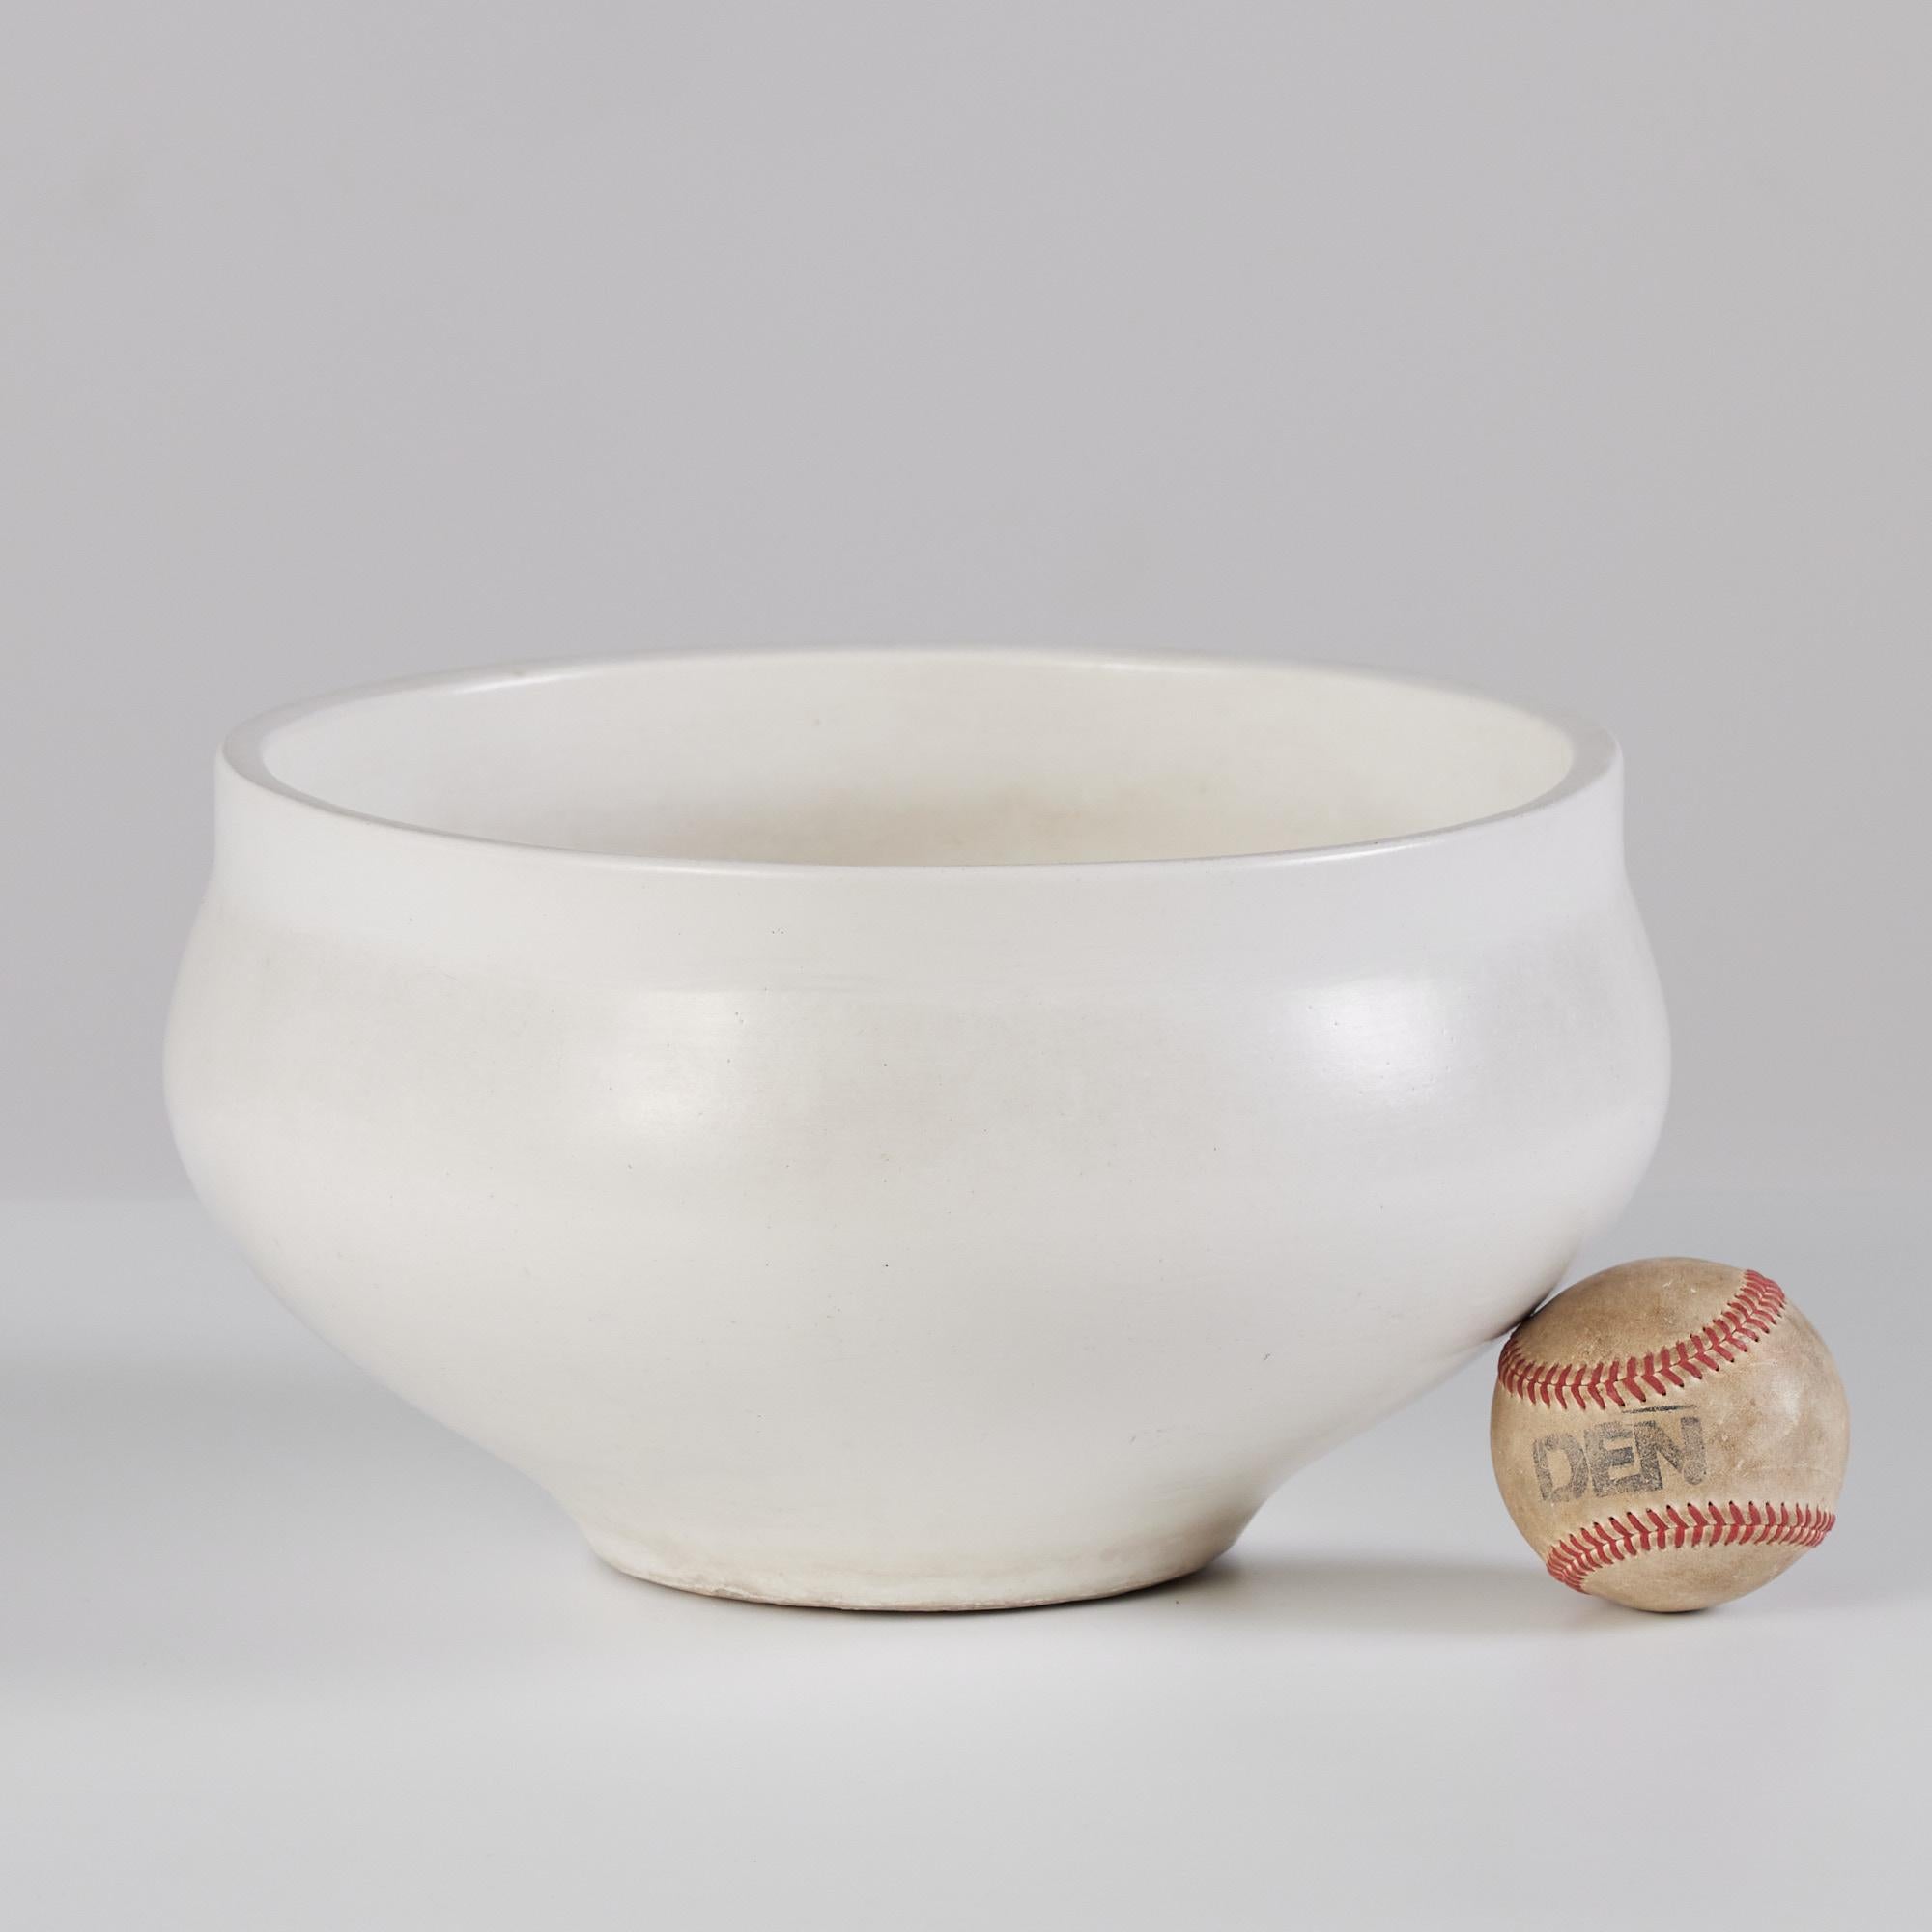 White planter by John Follis for Architectural Pottery. This example has a flat lipped rim and wide belly that tappers towards the bottom.

Dimensions: 11.25